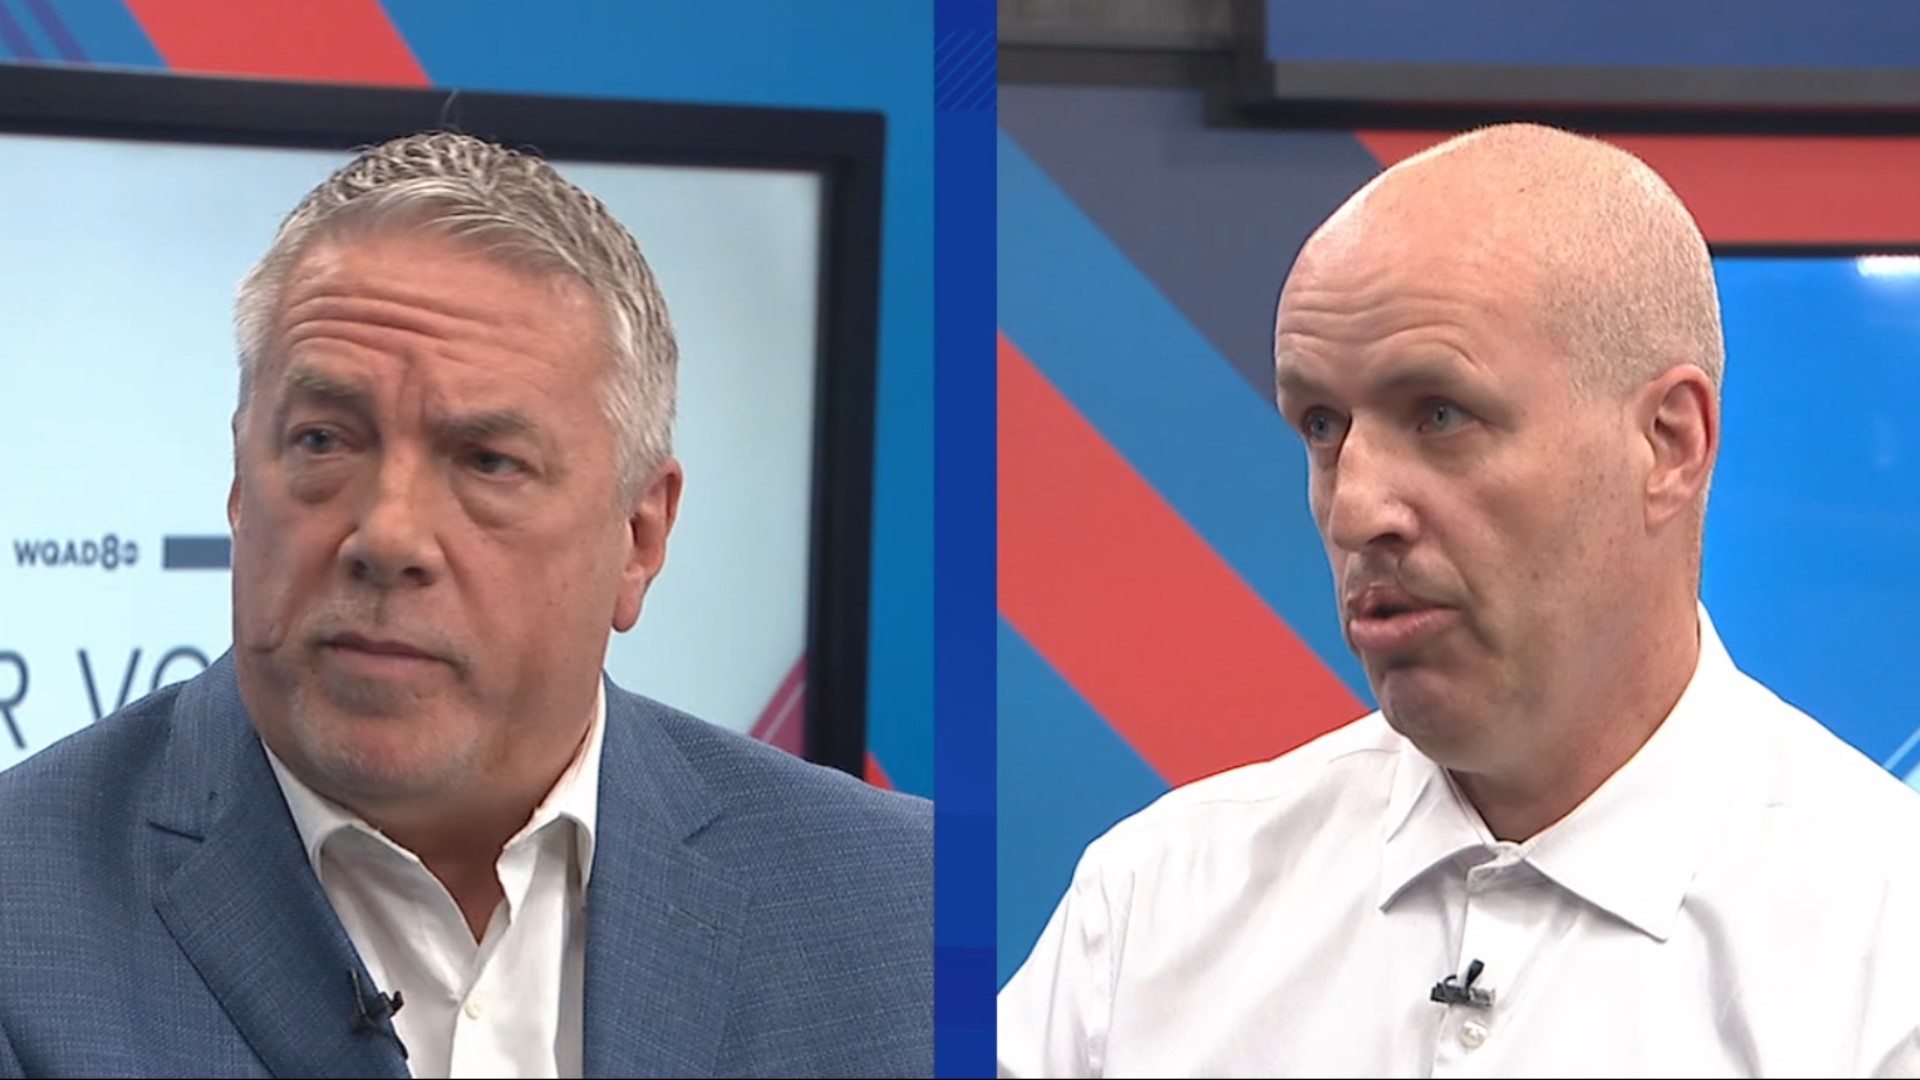 Democrat Gregg Johnson and Republican Tom Martens are facing off in the race for Illinois's 72nd District, and they shared their priorities and values with News 8.